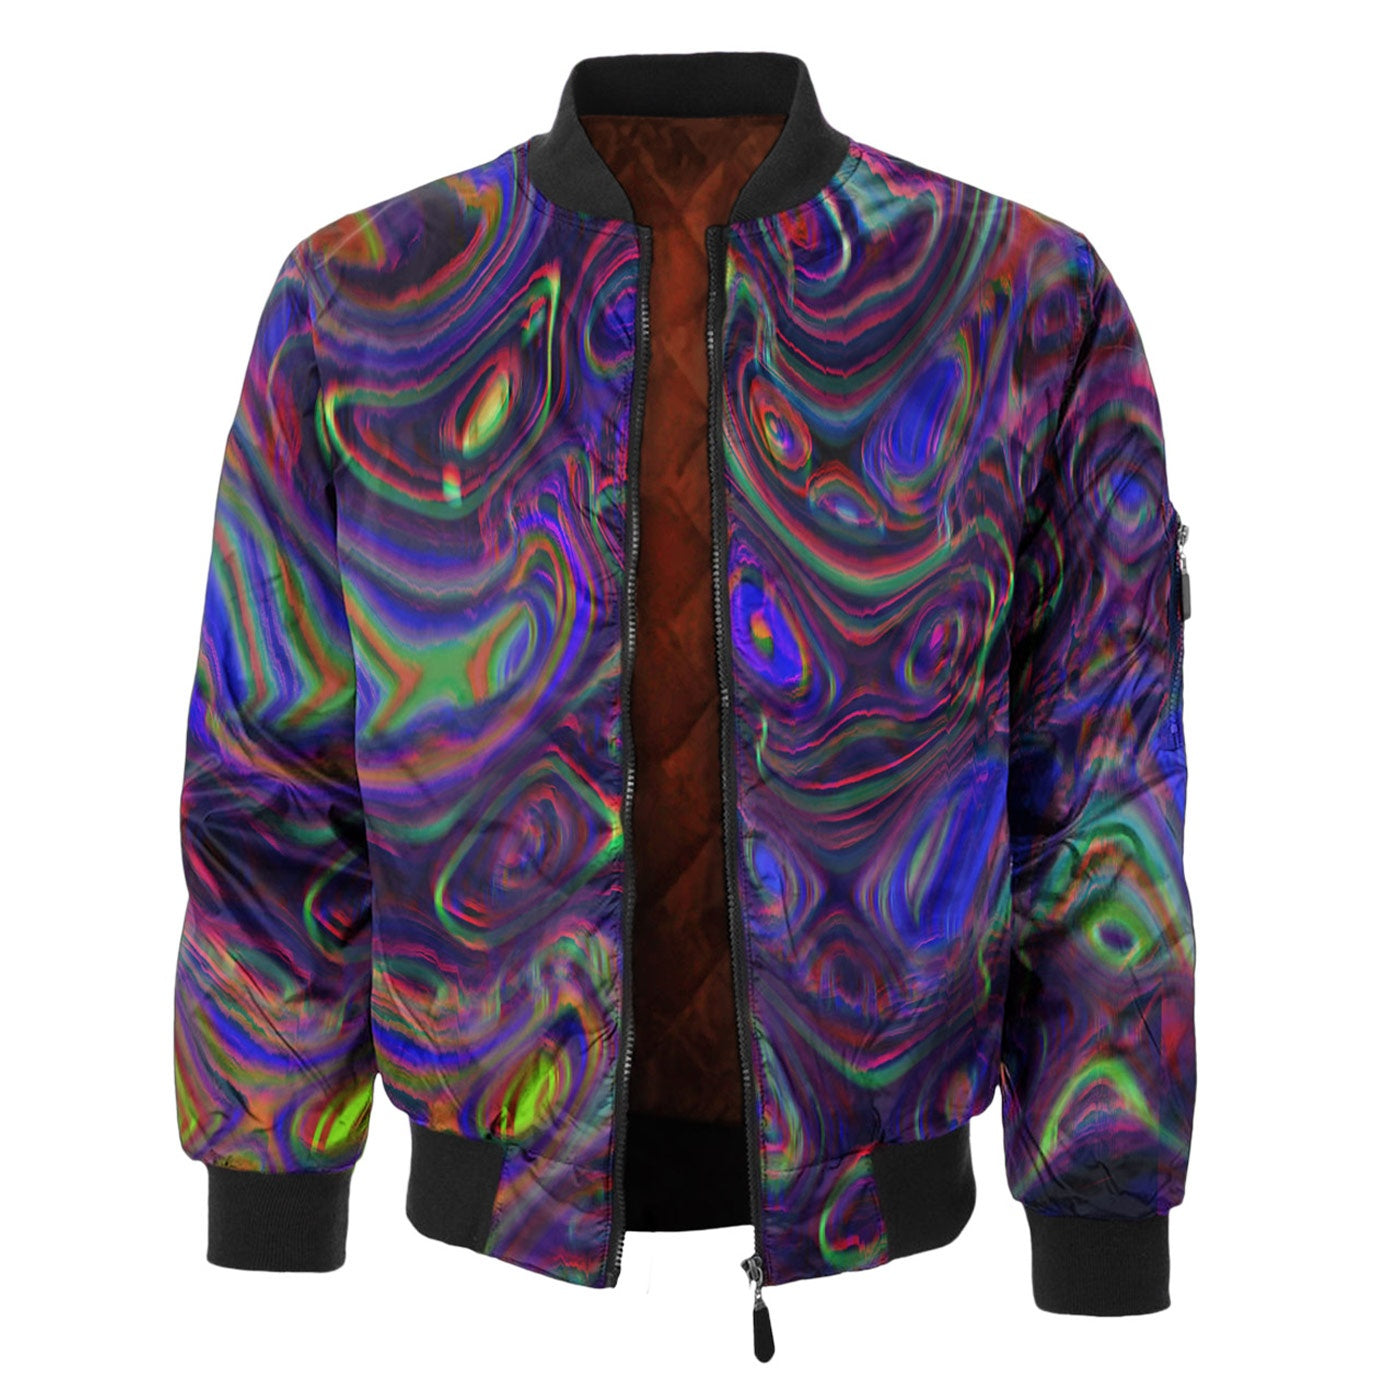 Lose Yourself Bomber Jacket